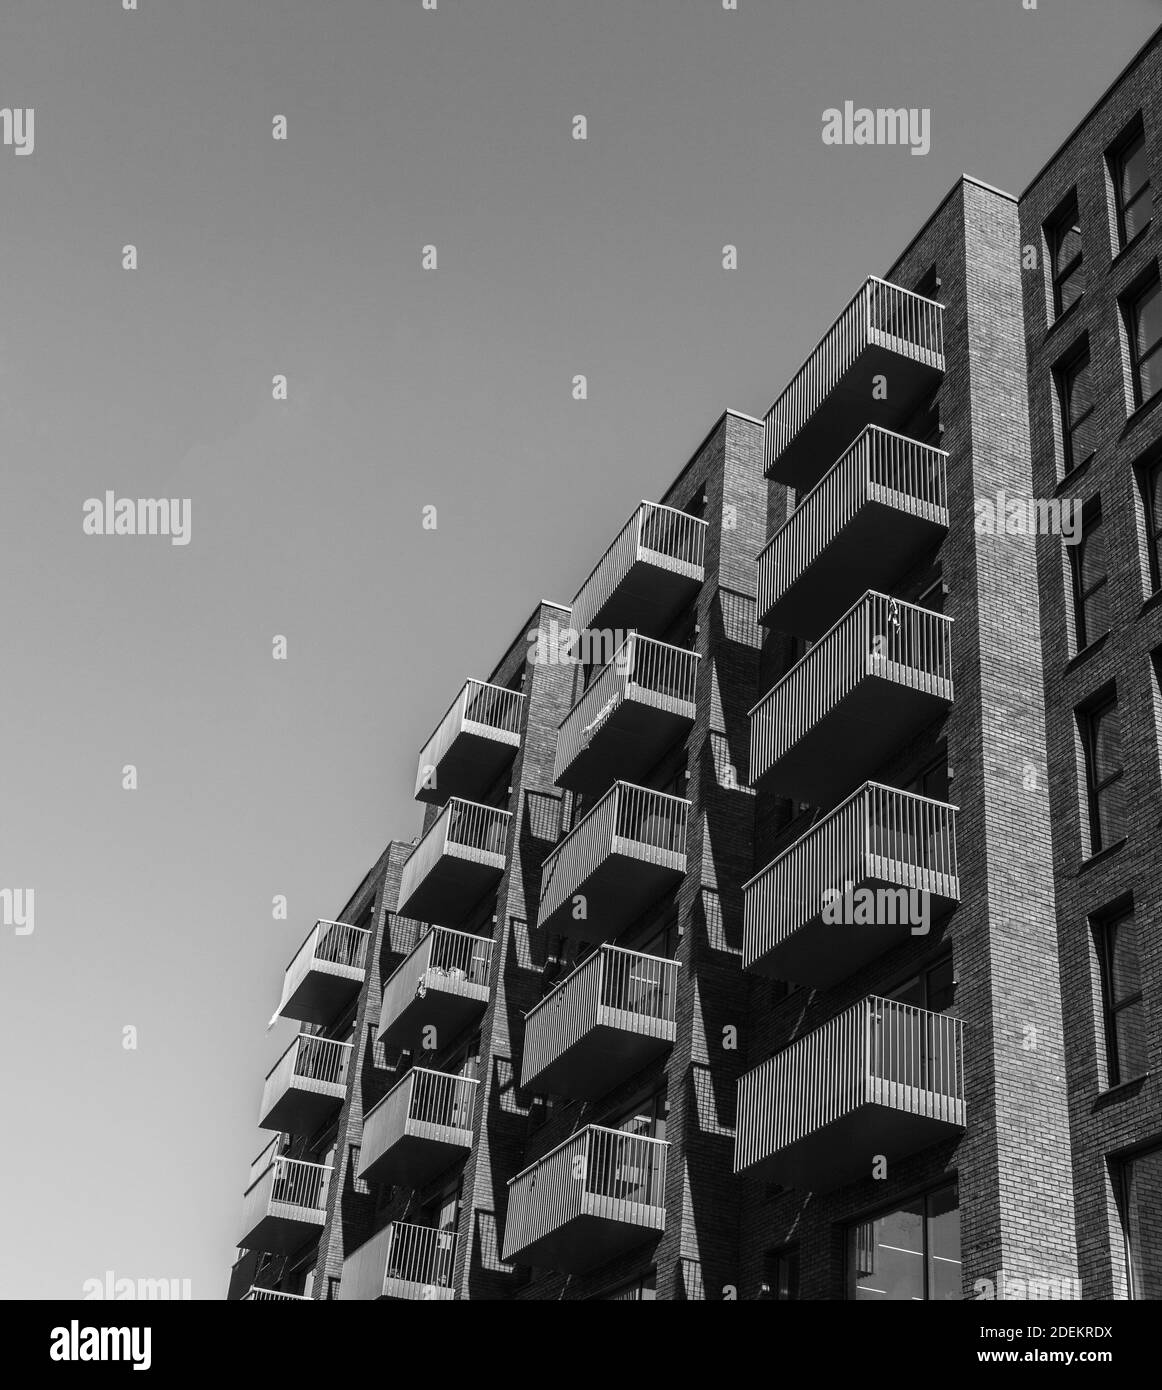 Apartment block with symmetrical railed balconies in Tower Hamlets, London,England,UK. In monochrome Stock Photo